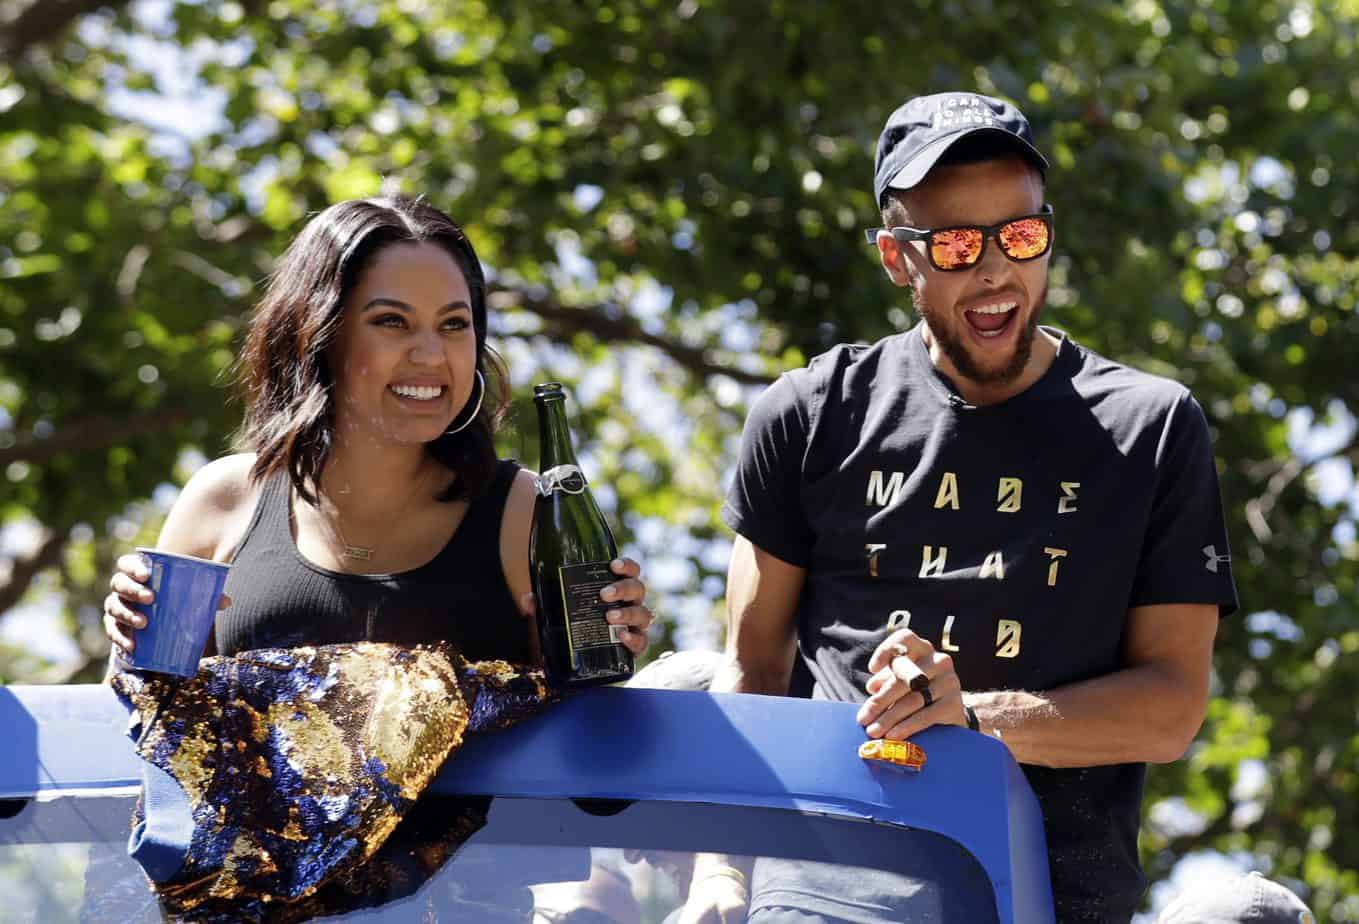 Steph Curry's wife, Ayesha Curry, took to social media to send out a chilling video after Steph broke the record for all time three-pointers